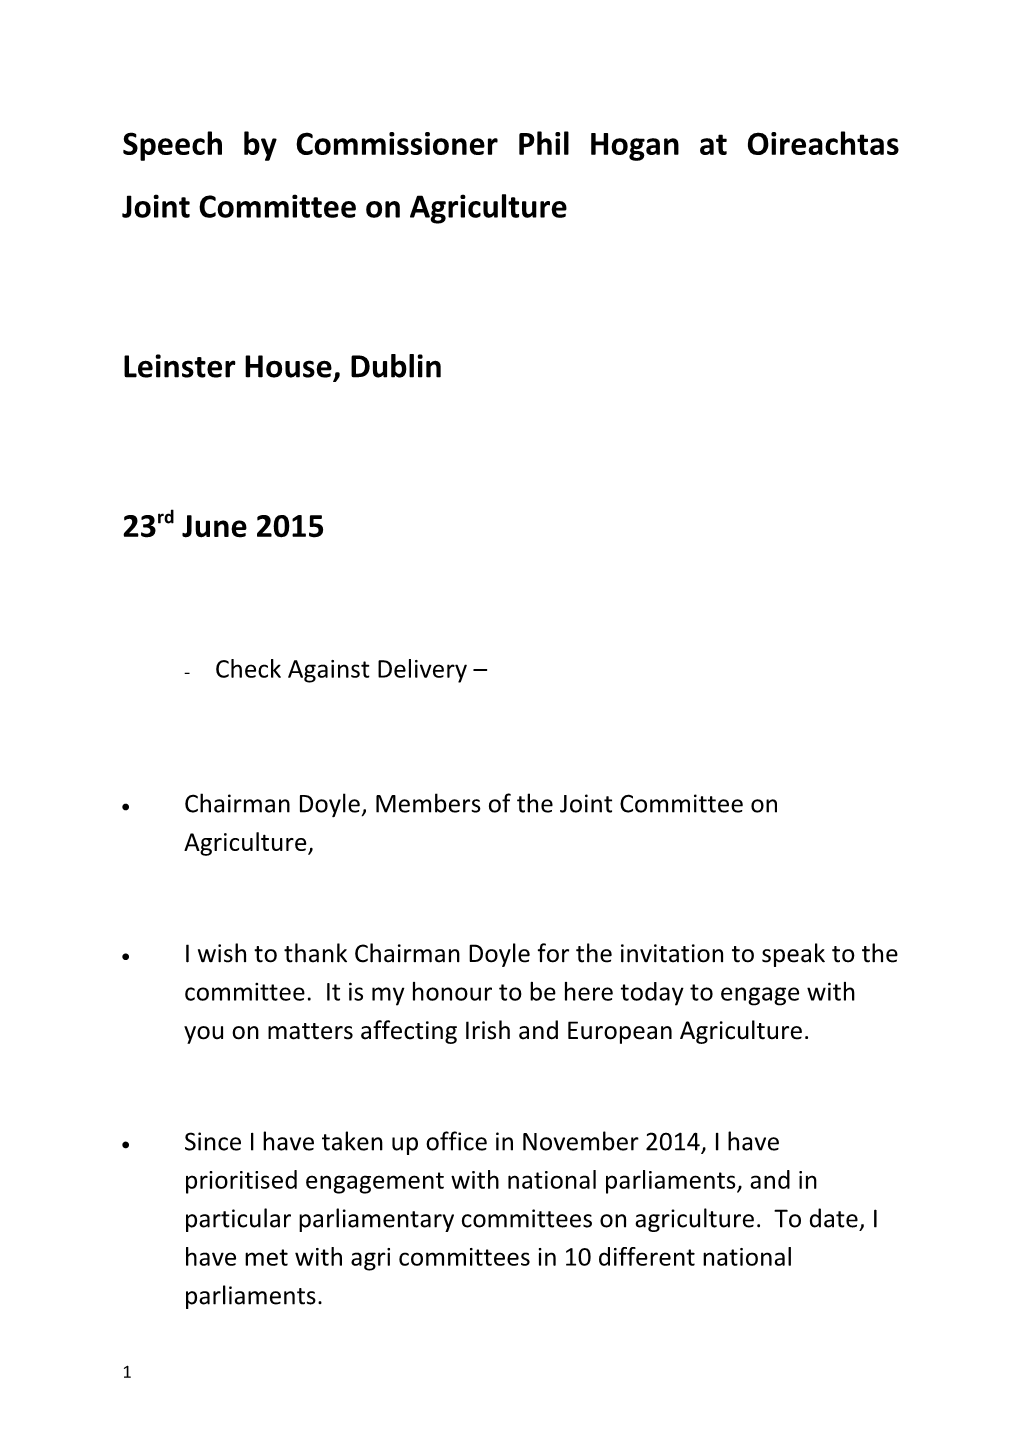 Speech by Commissioner Phil Hogan at Oireachtas Joint Committee on Agriculture